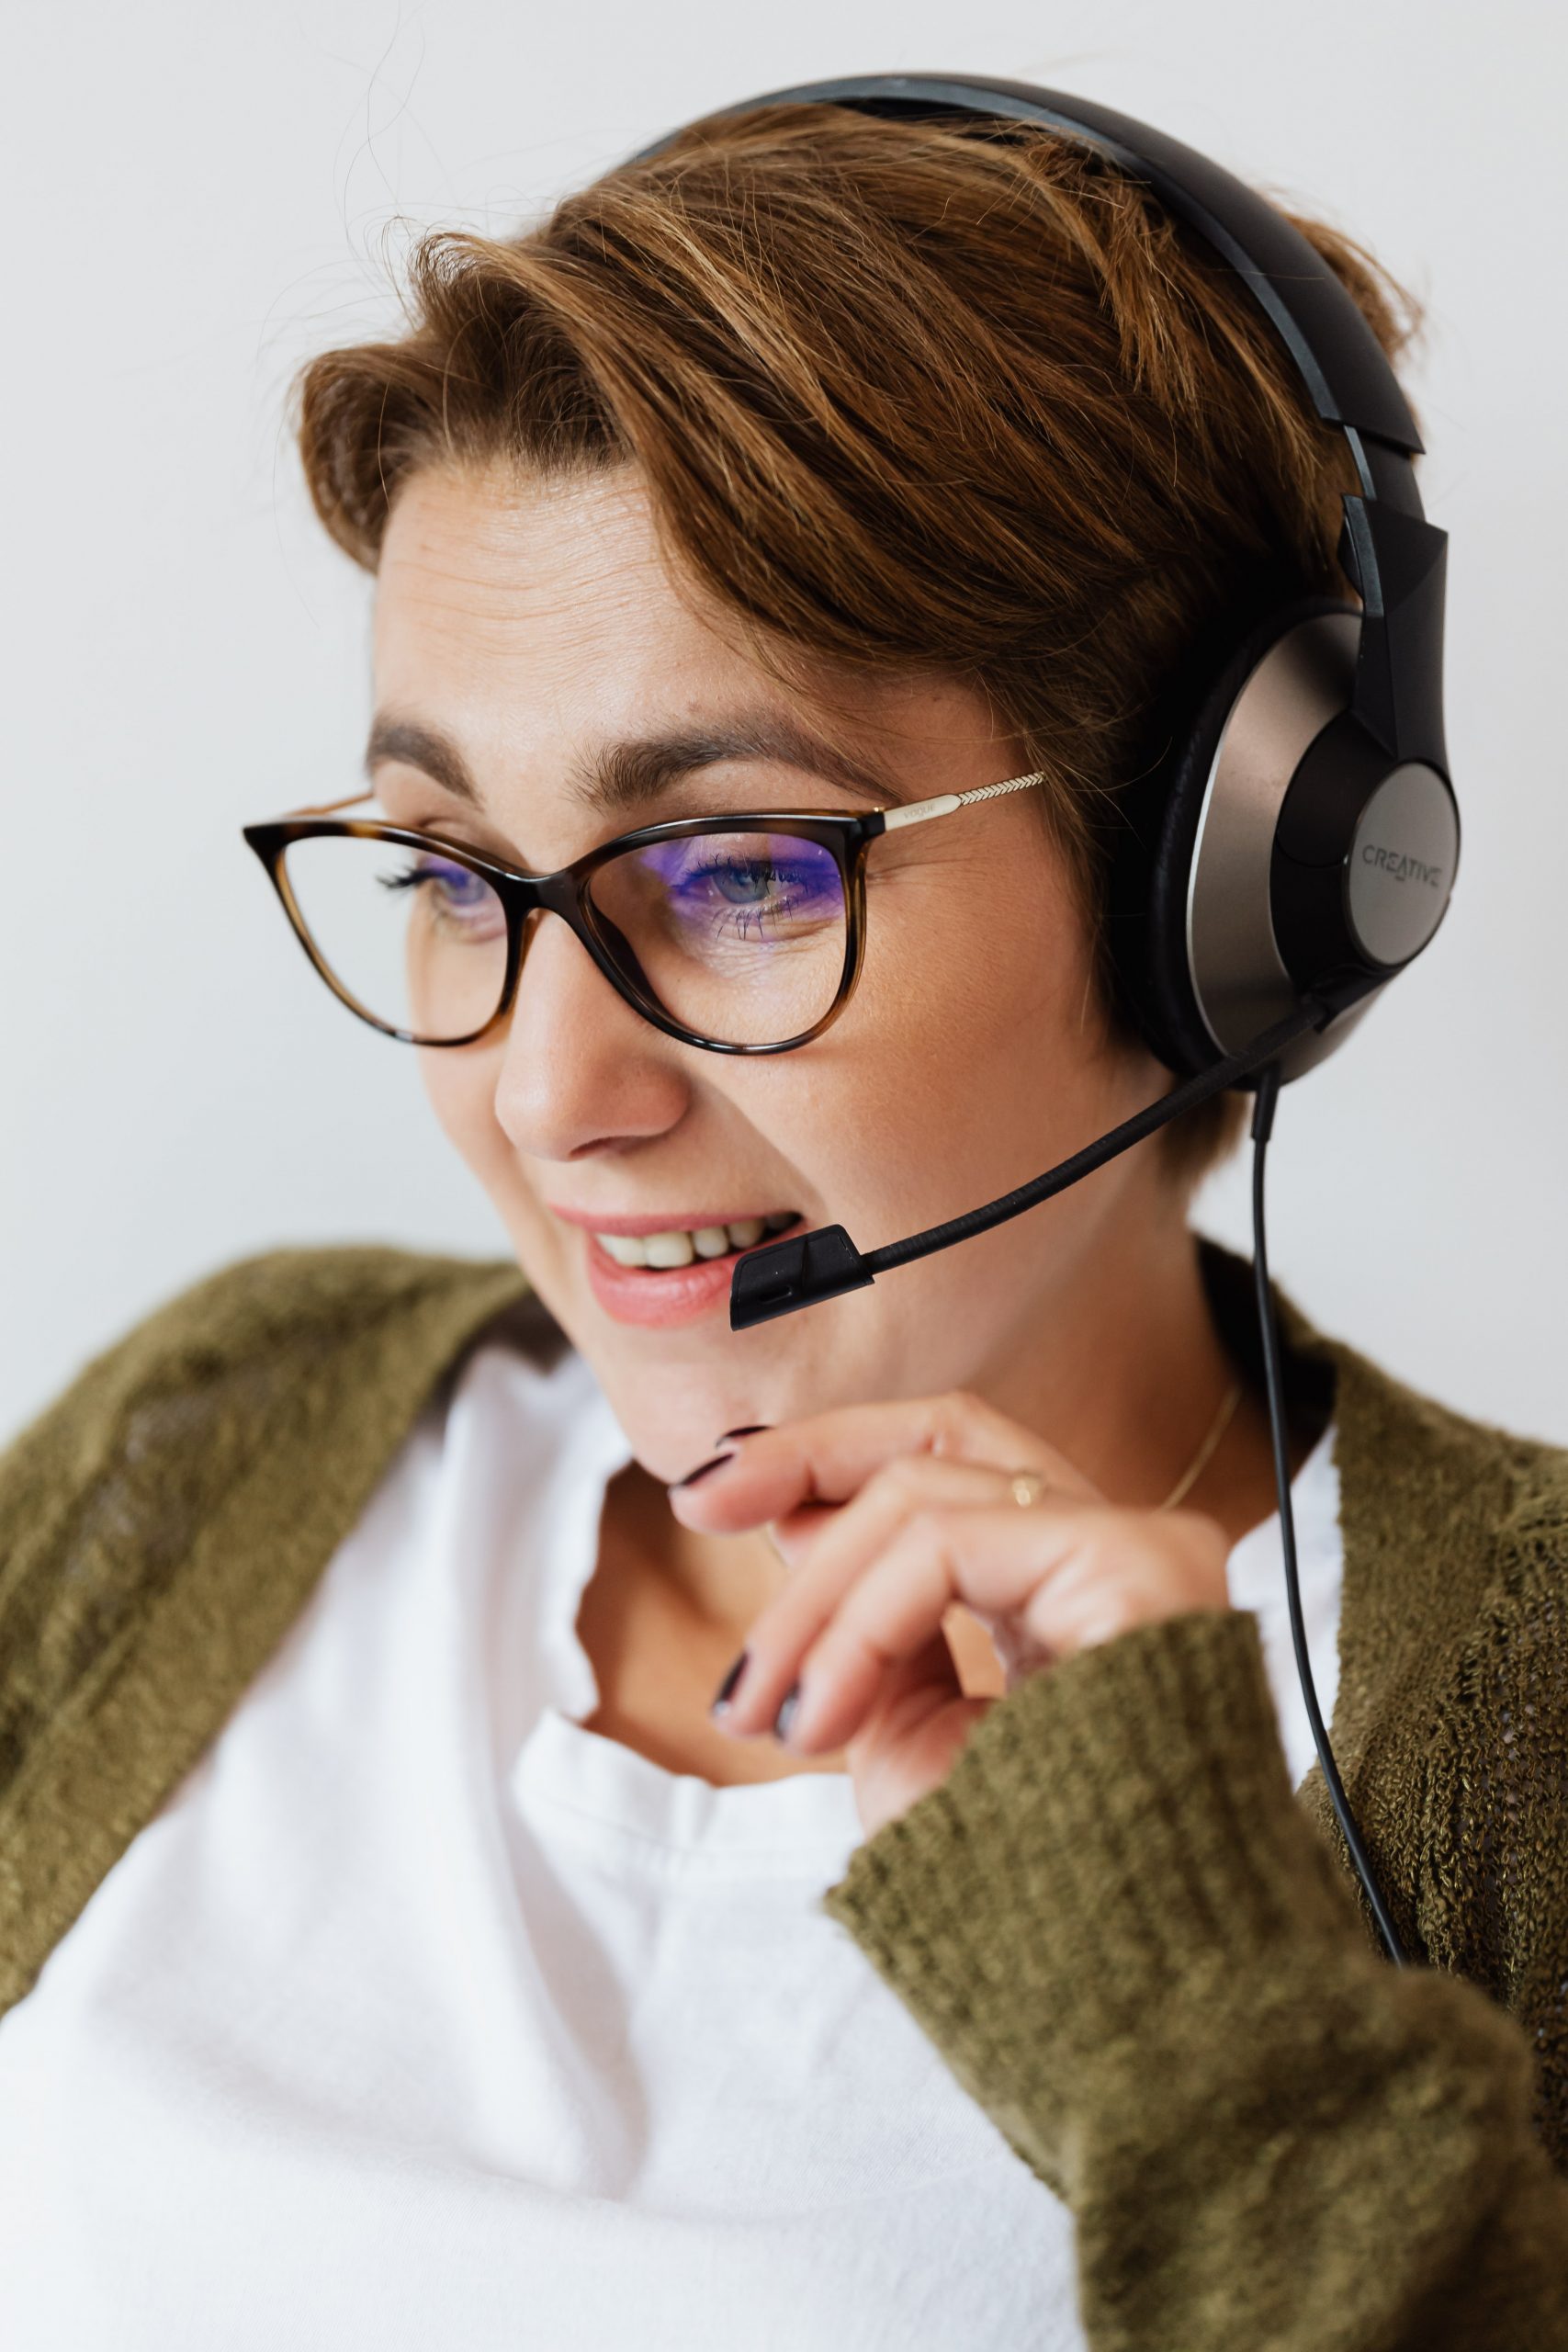 Telemarketing Compliance For Nonprofits